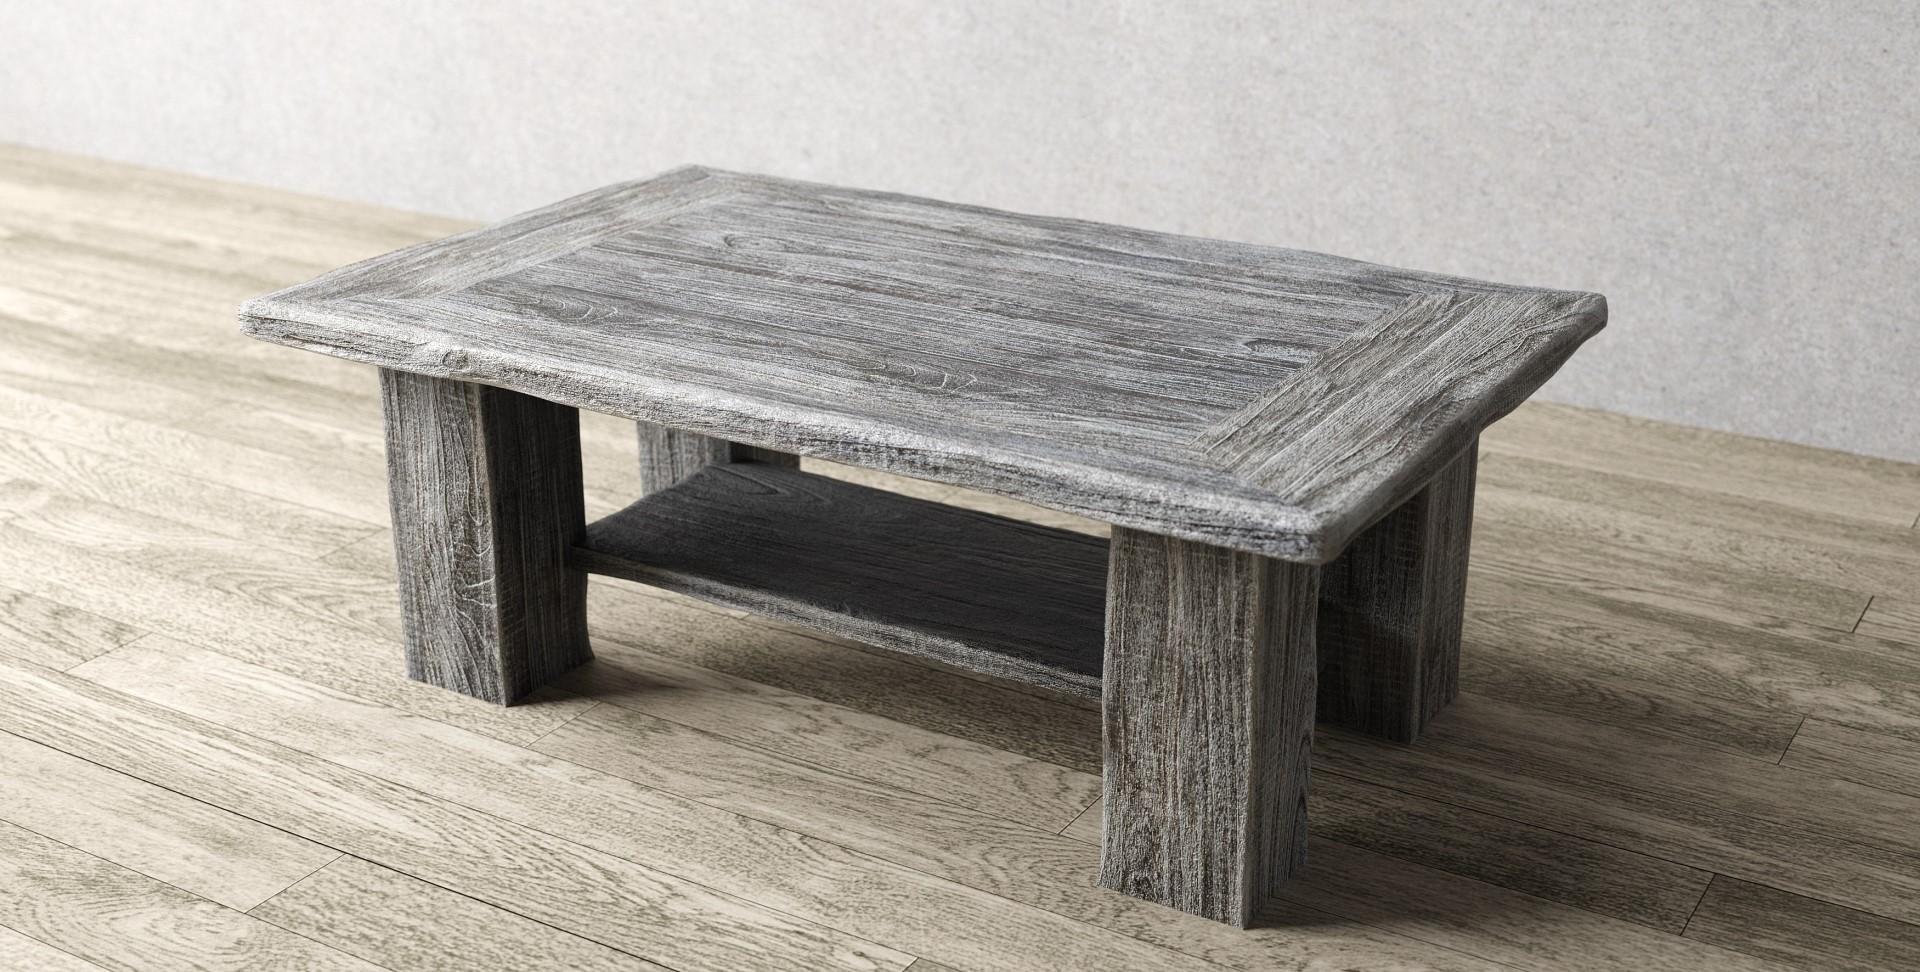 Rustic Teak Coffee Table in Distressed Weathered Gray In New Condition For Sale In Boulder, CO